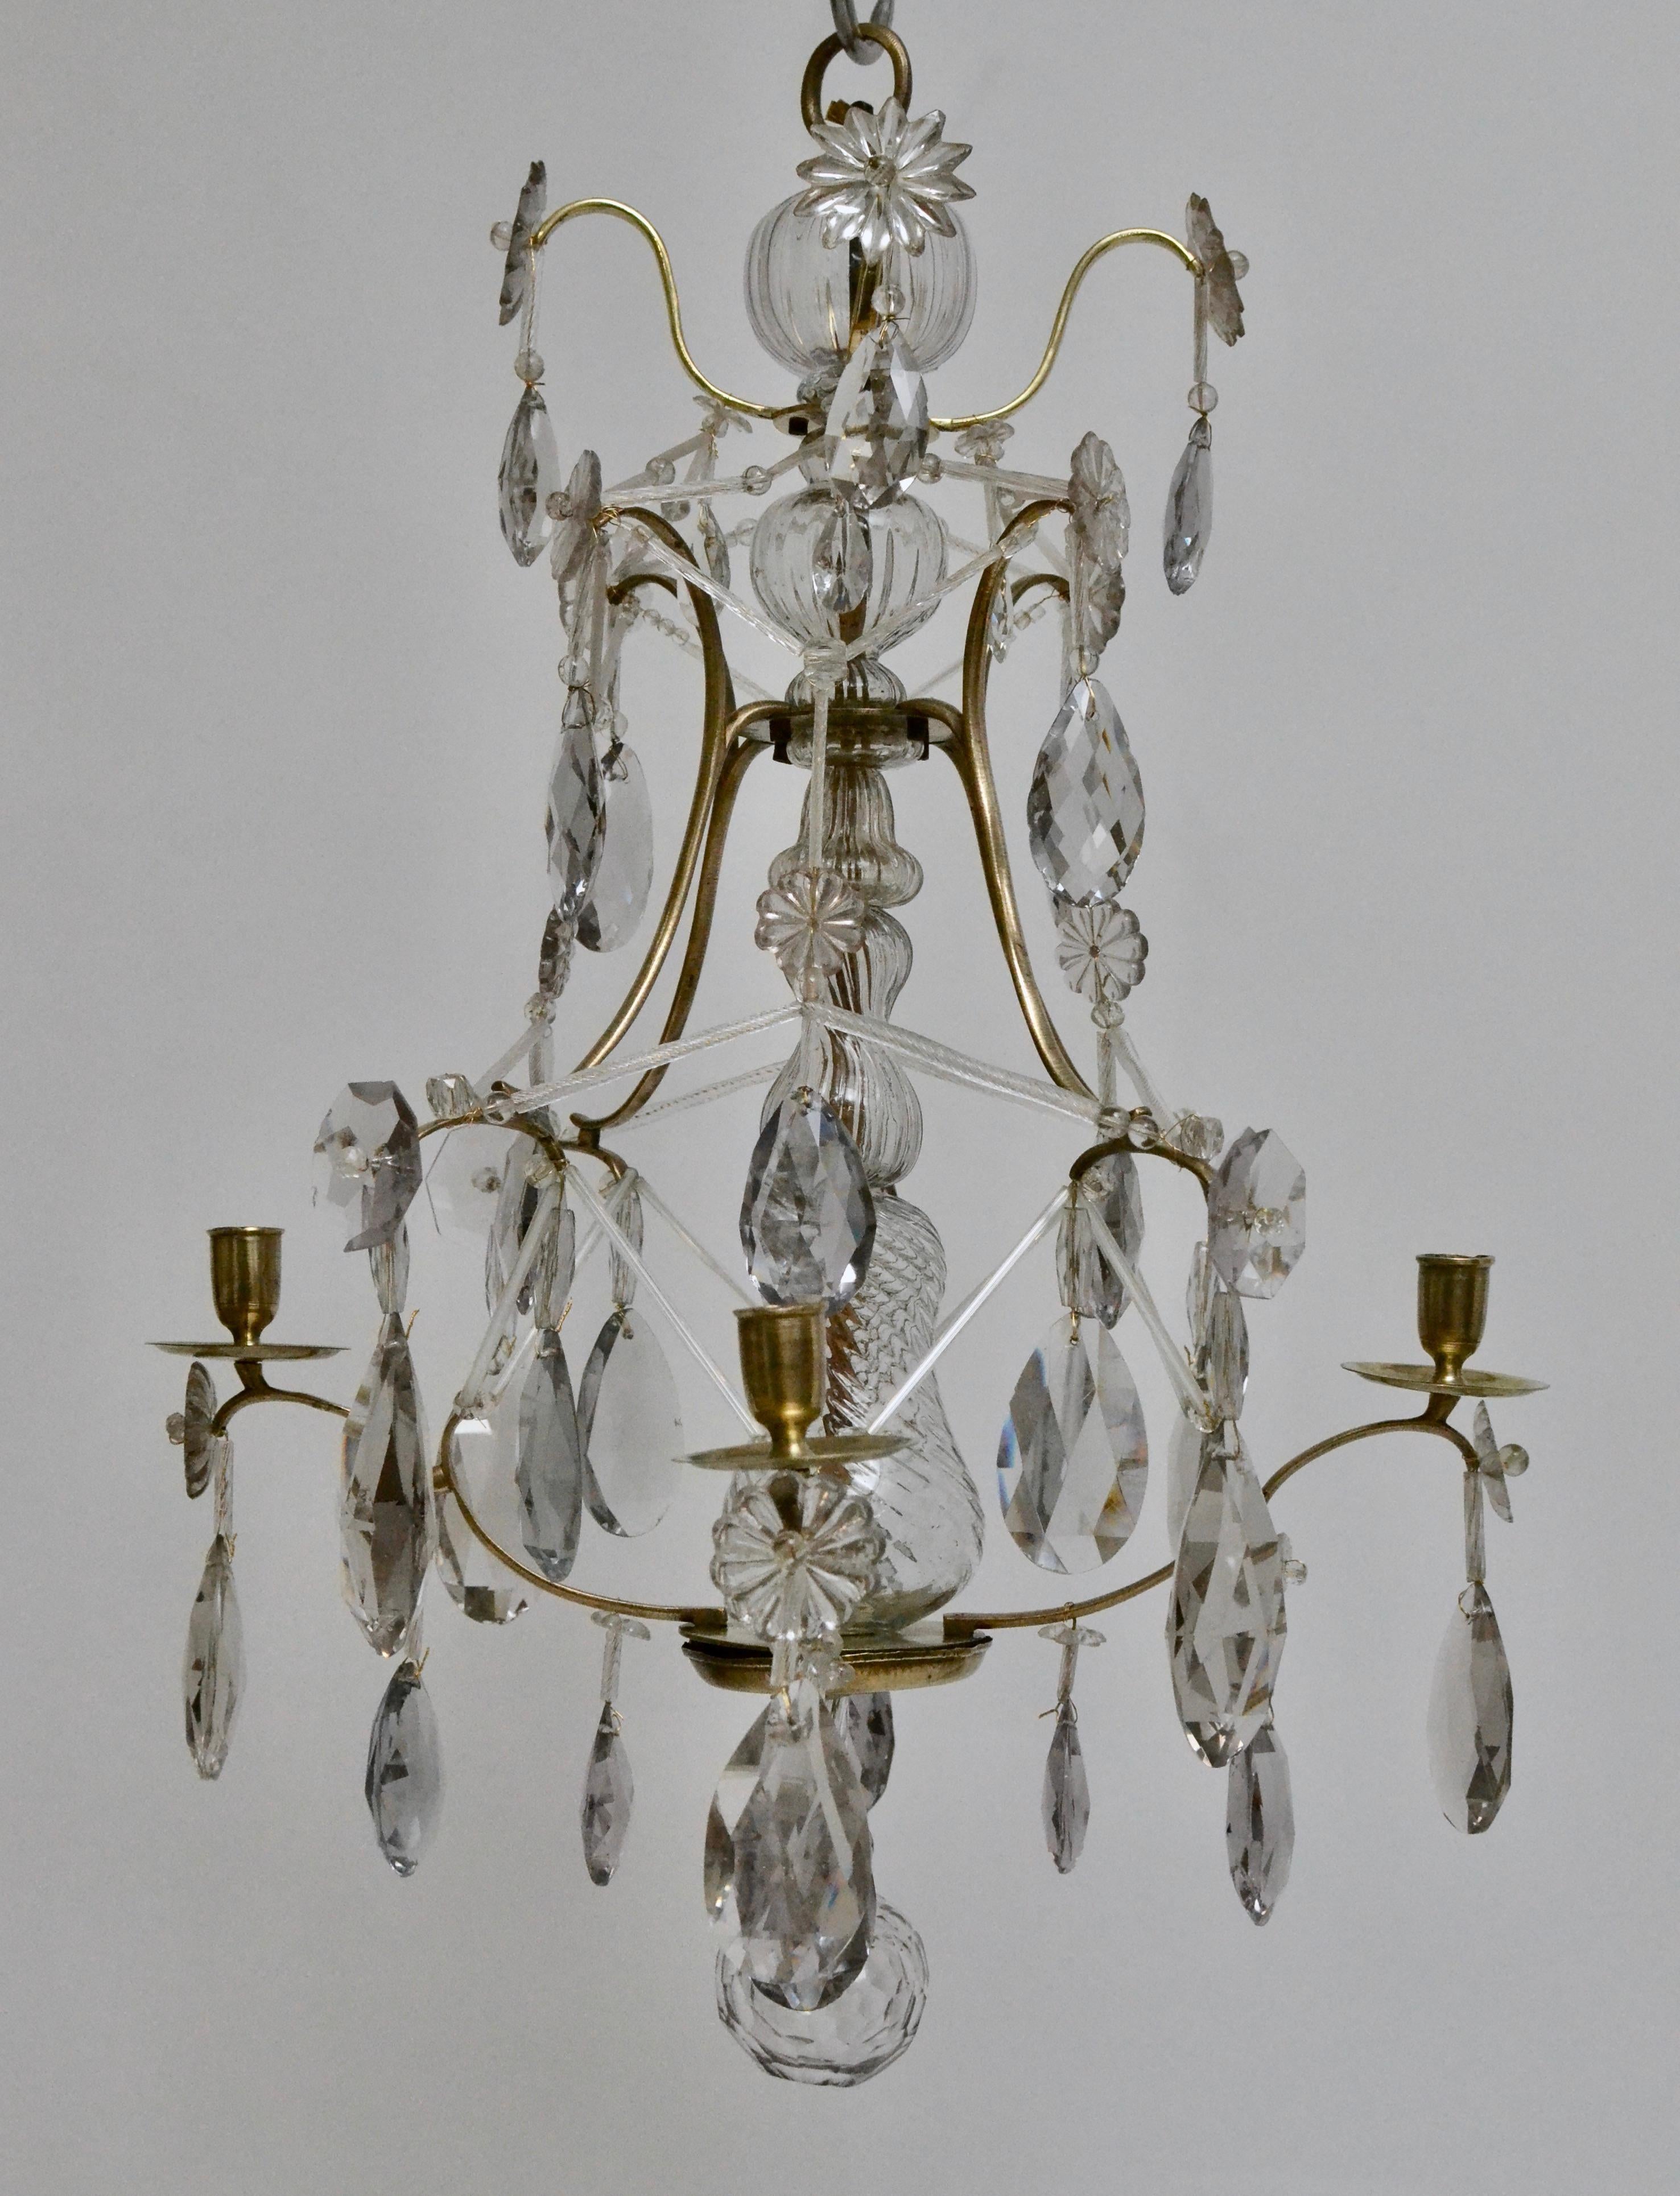 A small Swedish Louis XVI polished brass and cut-glass four-light chandelier, 18th century. The brass cage hung with cut-glass pendants and other shapes. The center stem dressed with blown glass pieces ending below with a cut-glass boll. The small